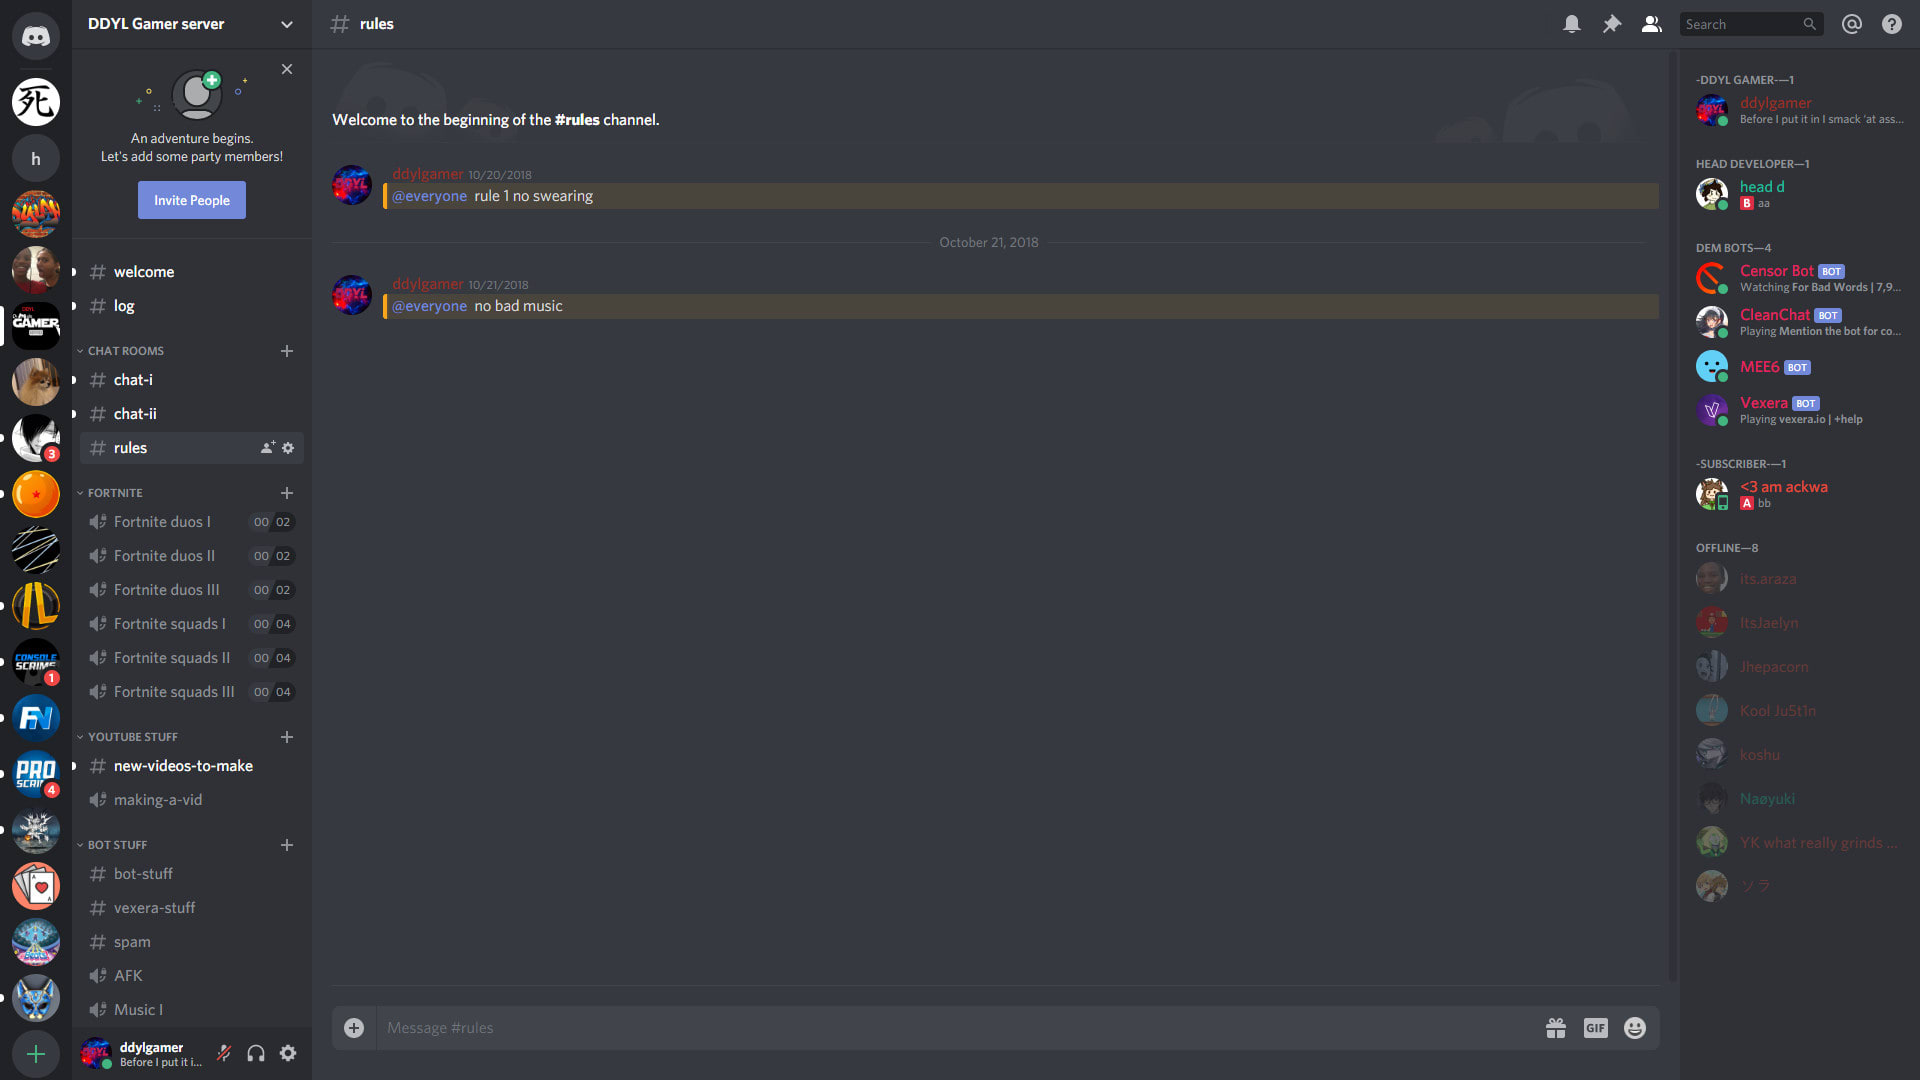 Make You A Professional Discord Server By Dd 2341 - roblox dating discord server